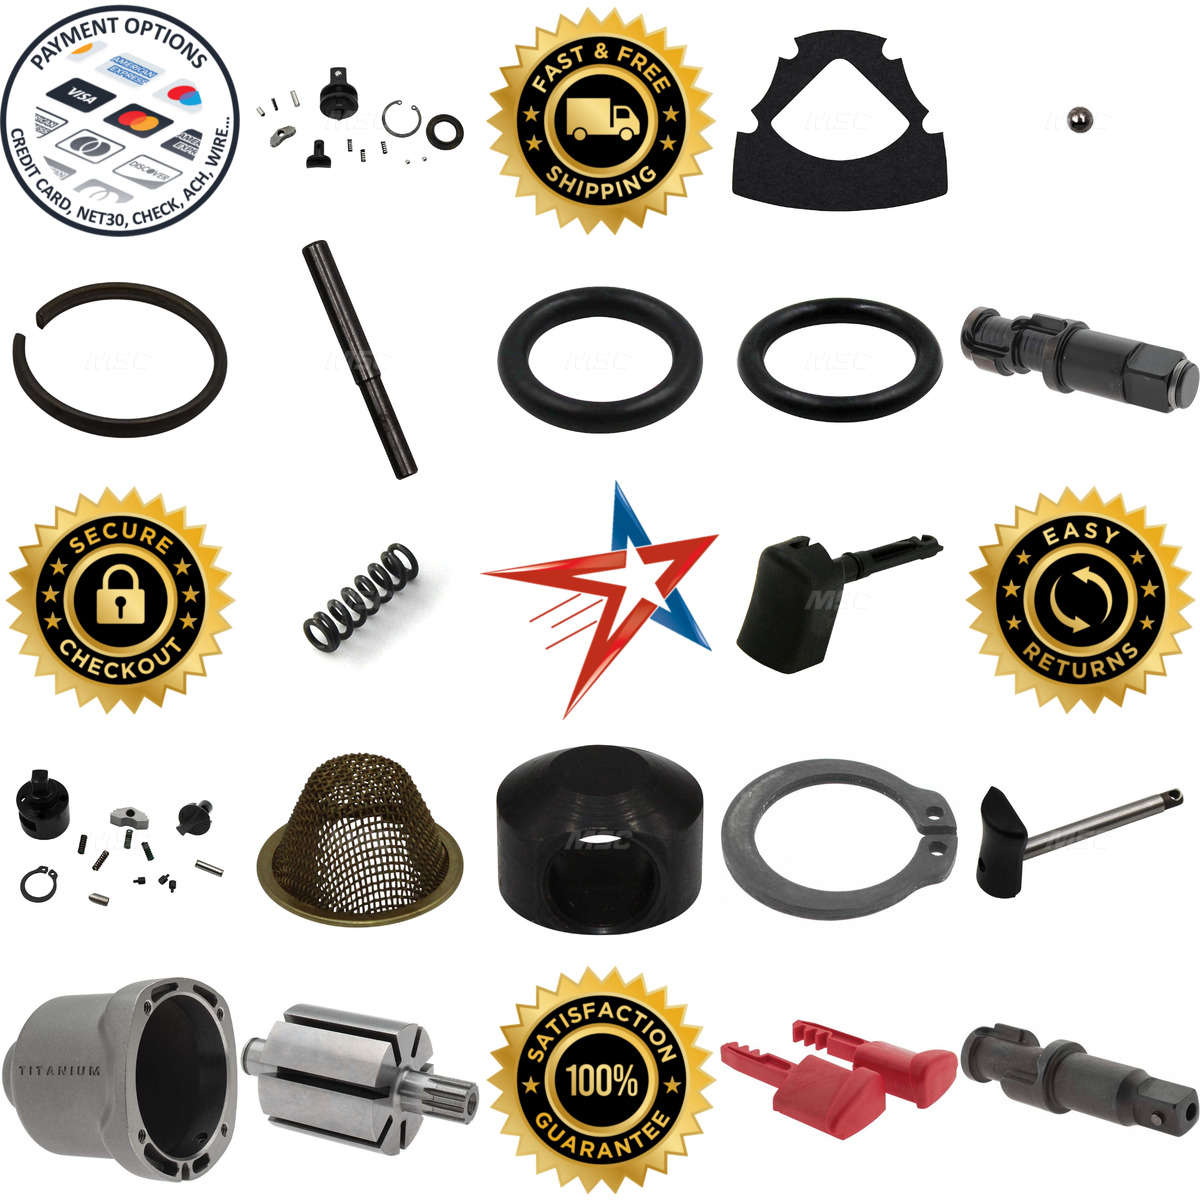 A selection of Impact Wrench and Ratchet Parts products on GoVets